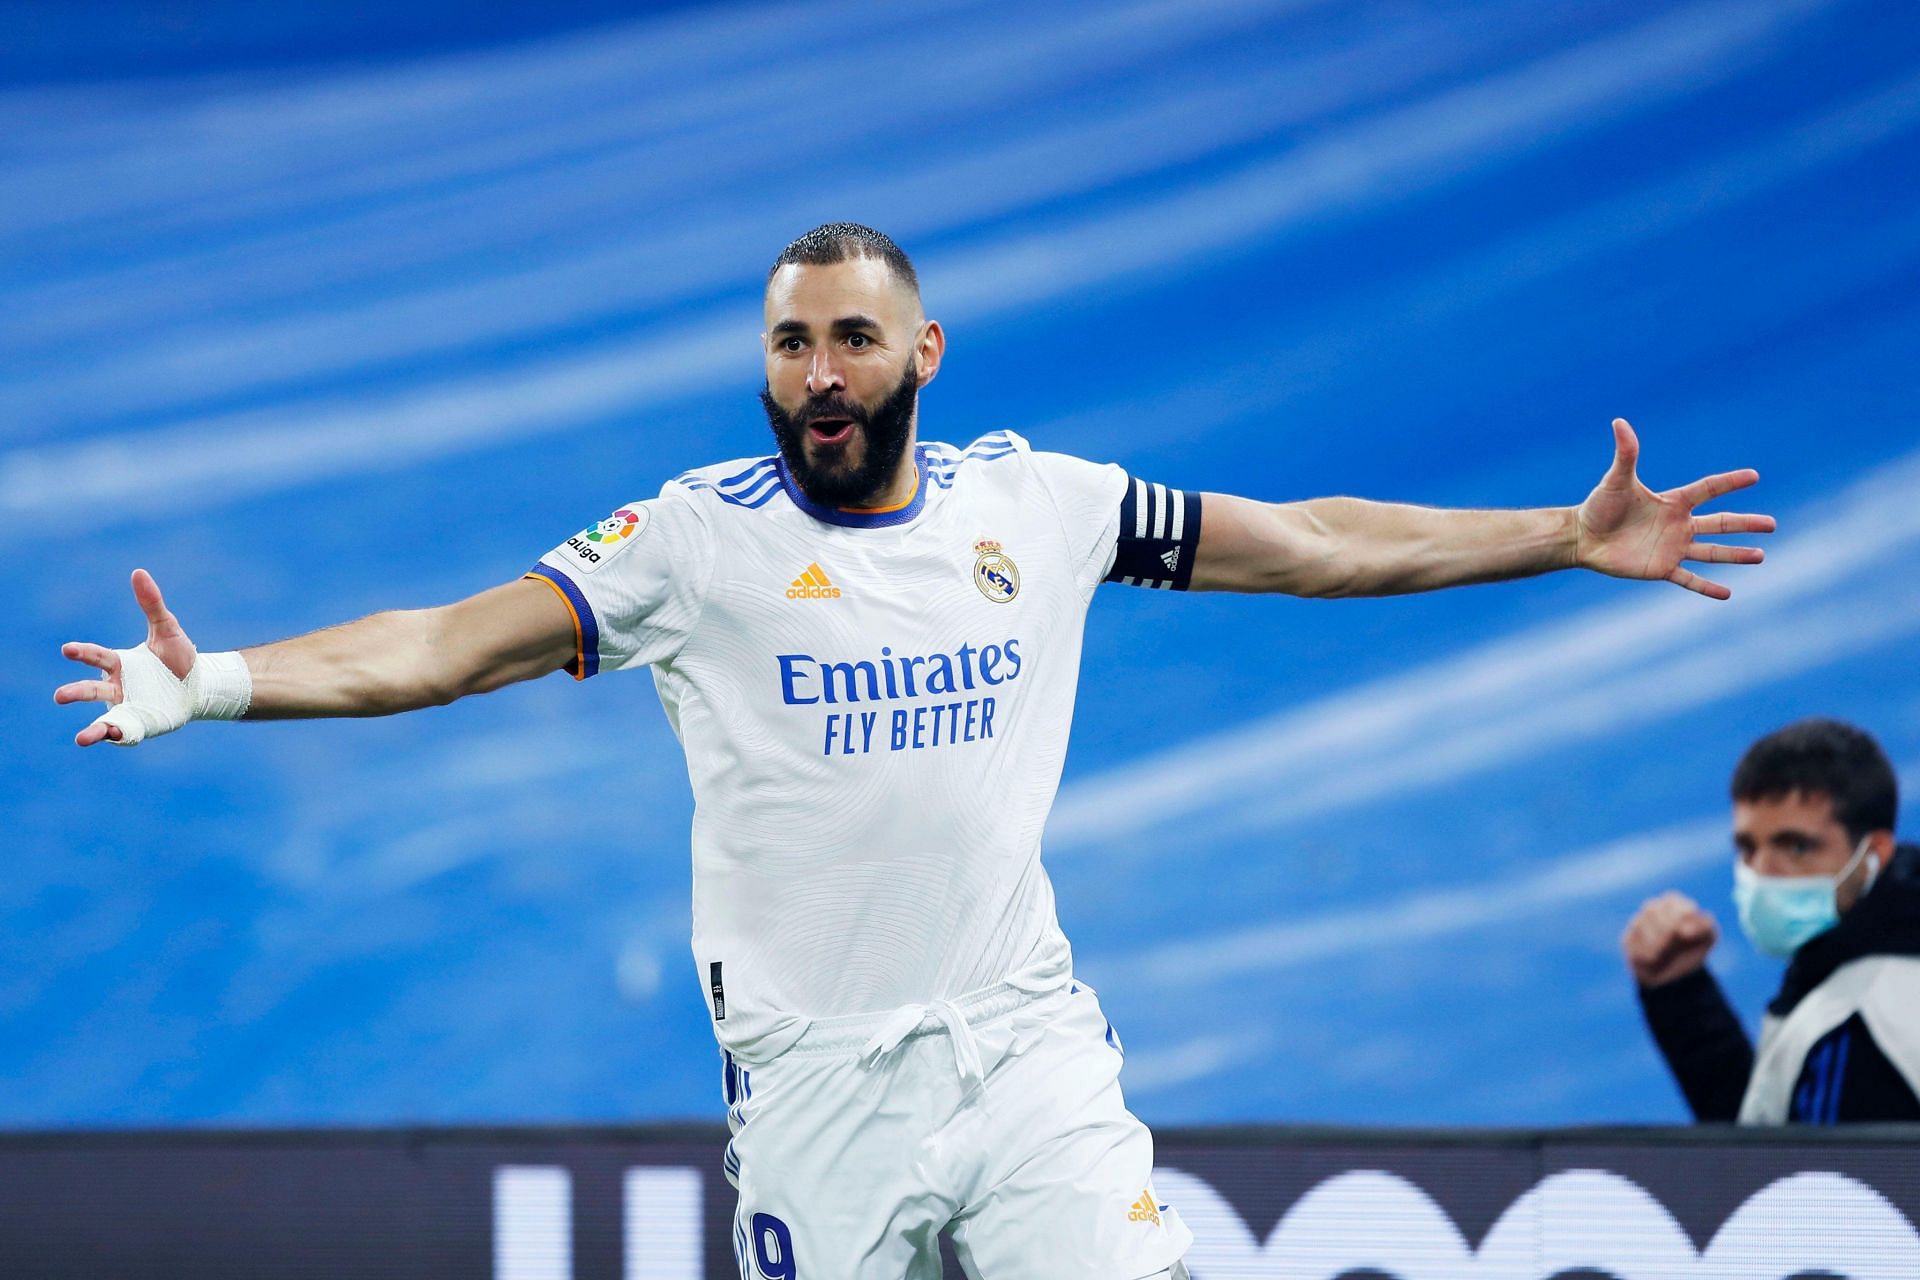 Karim Benzema came up clutch for Real Madrid against Sevilla